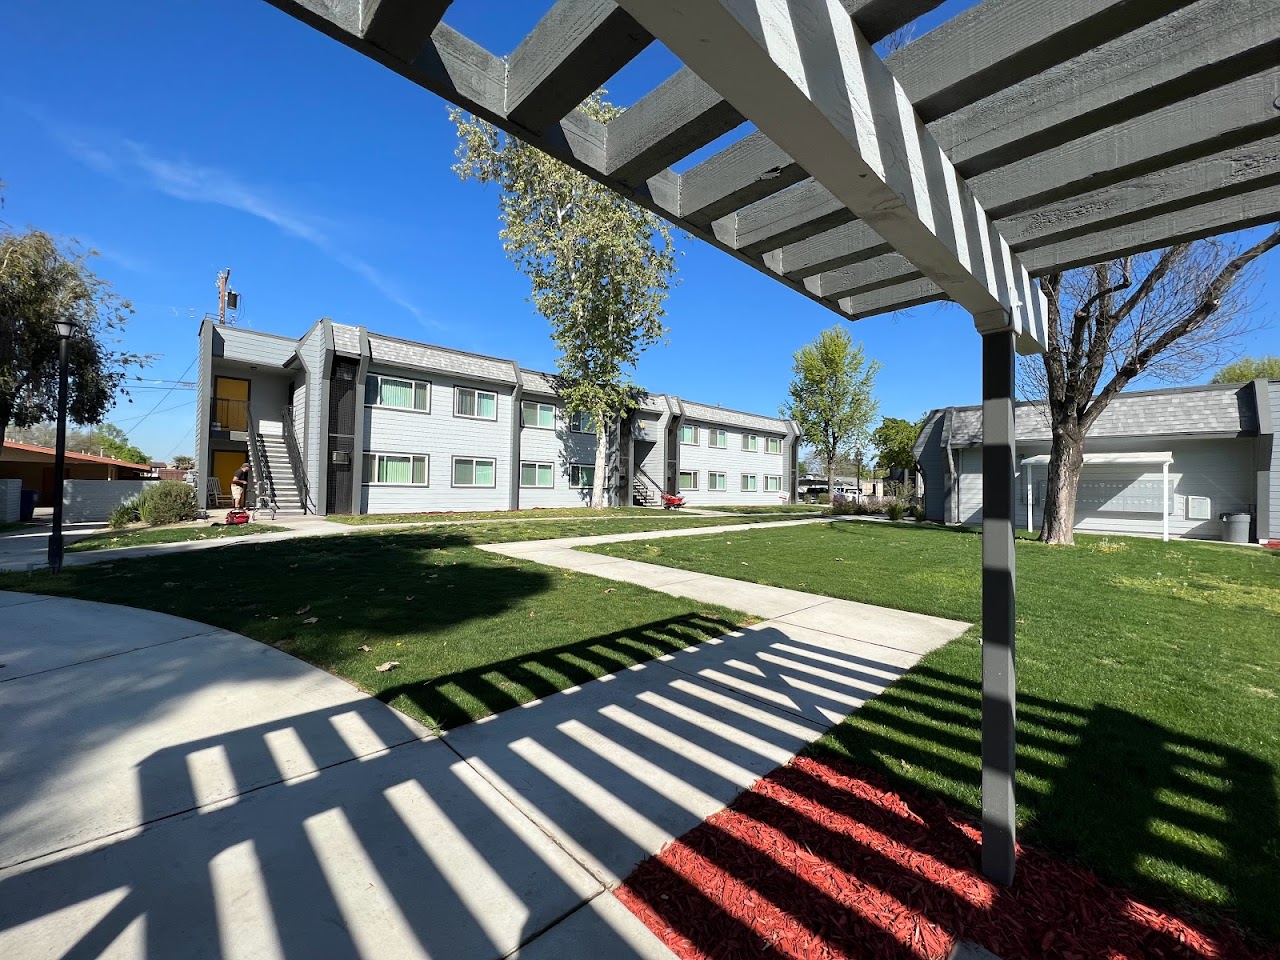 Photo of GRACE AND LAUGHTER APARTMENTS. Affordable housing located at 1051 N. EATON AVENUE DINUBA, CA 93618